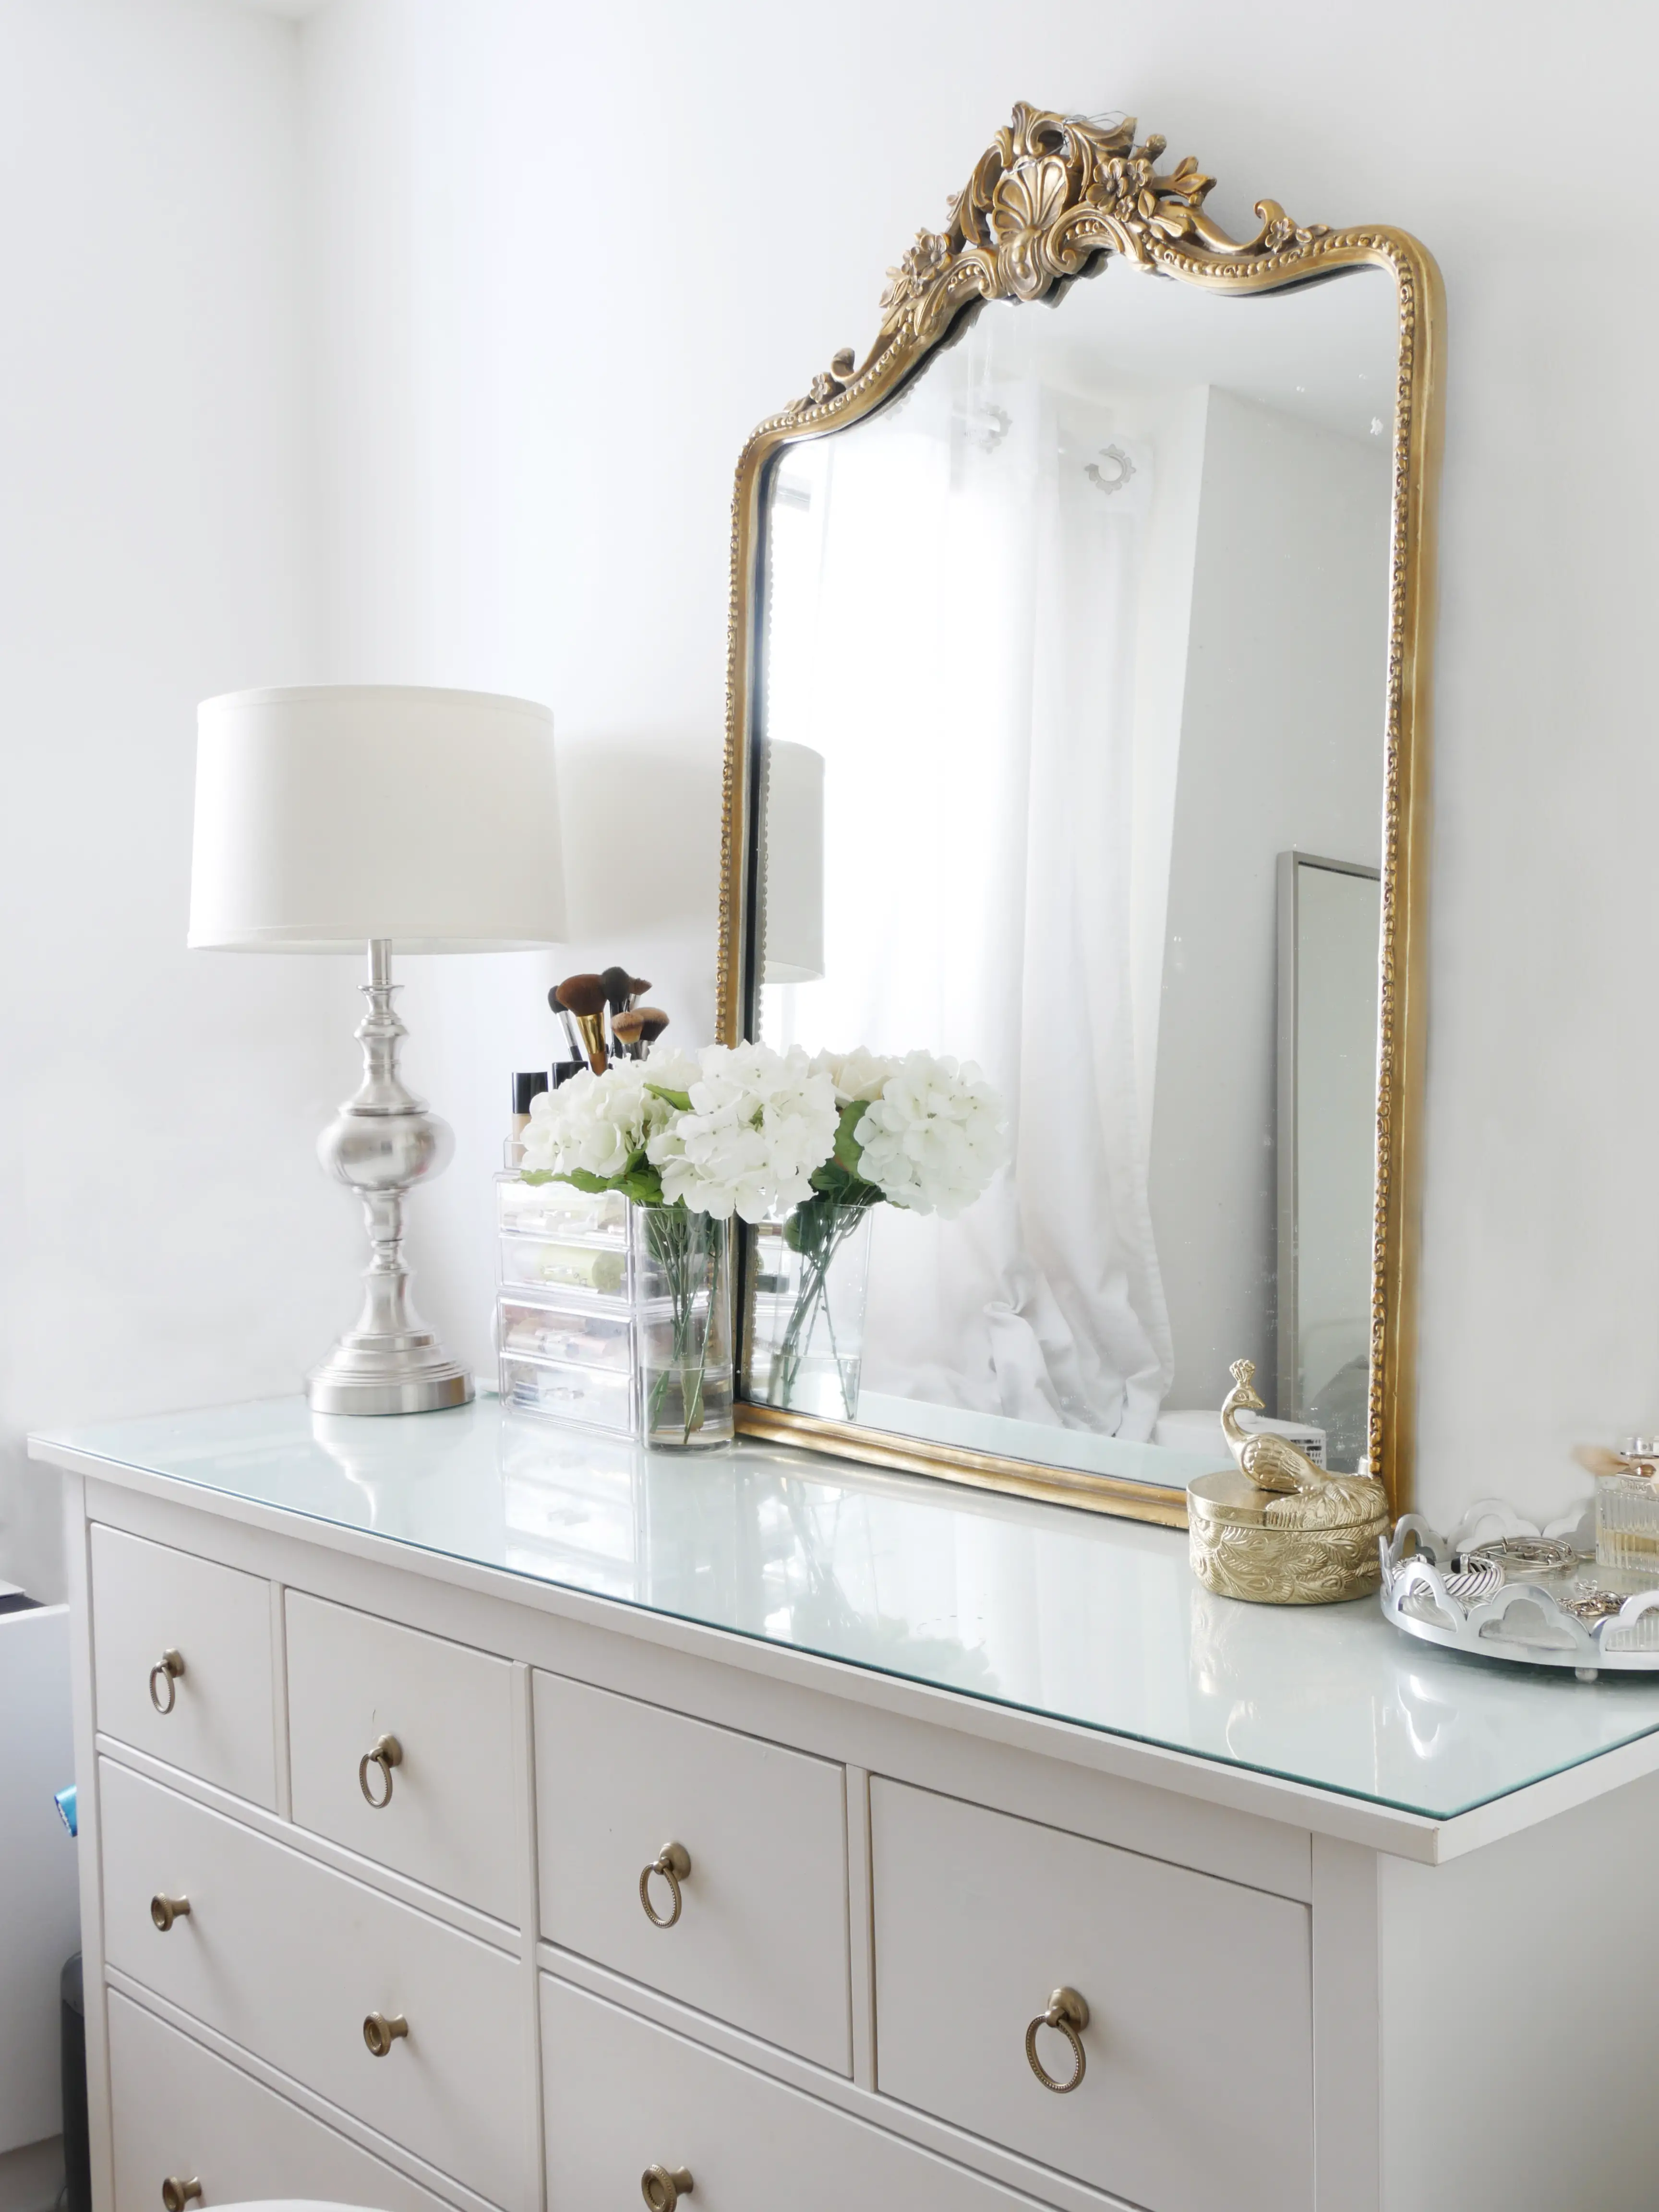 City Chic Decor, How High To Hang A Mirror Above Sideboard